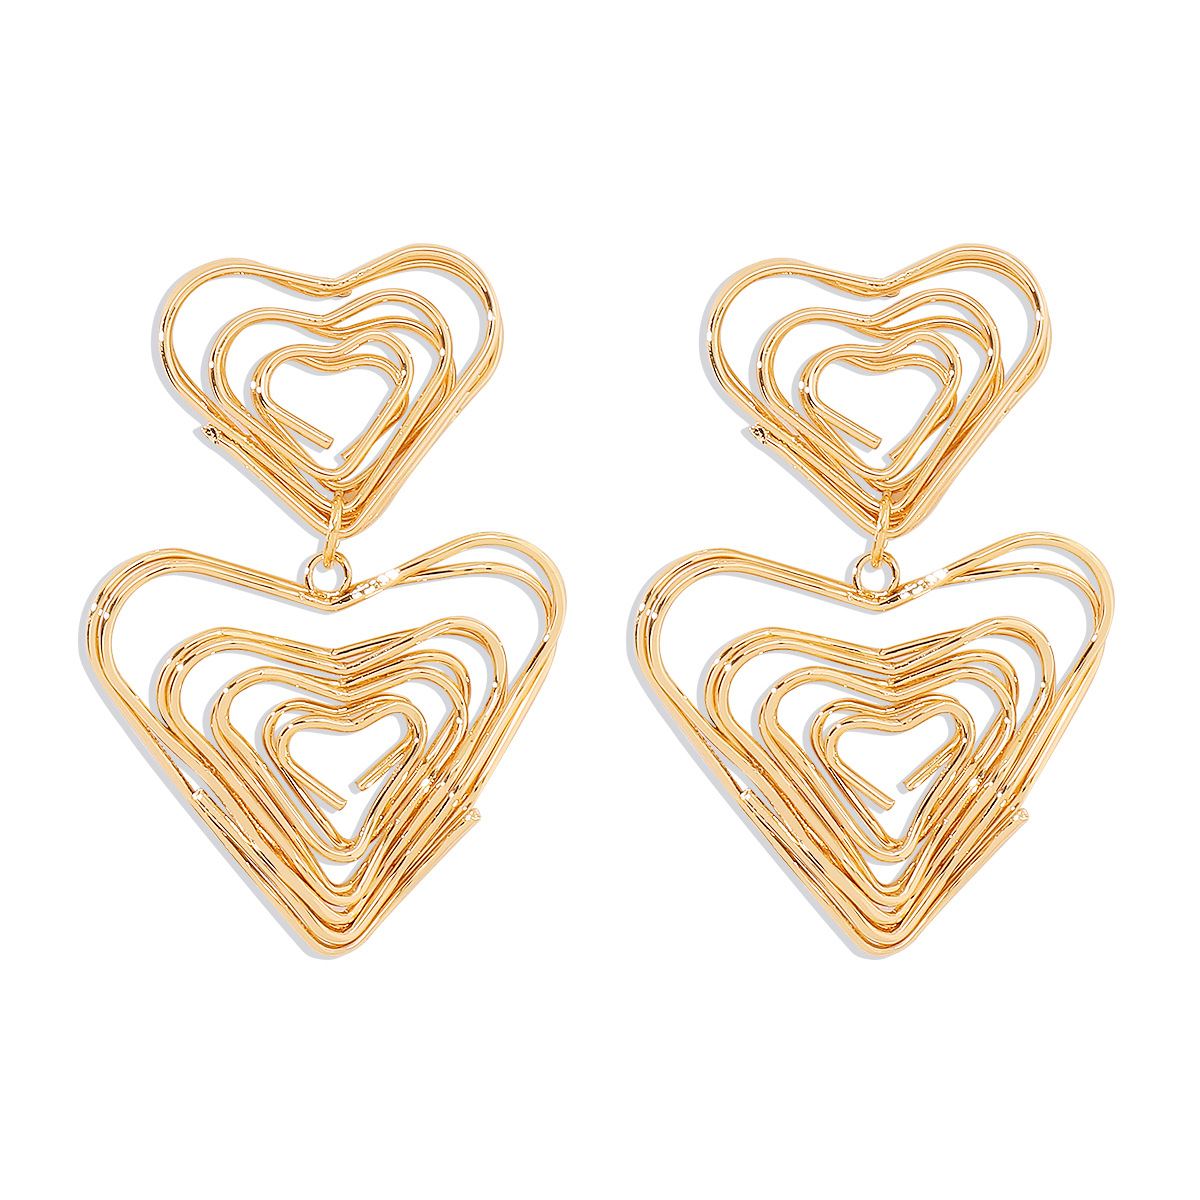 1:Double hearts - Gold